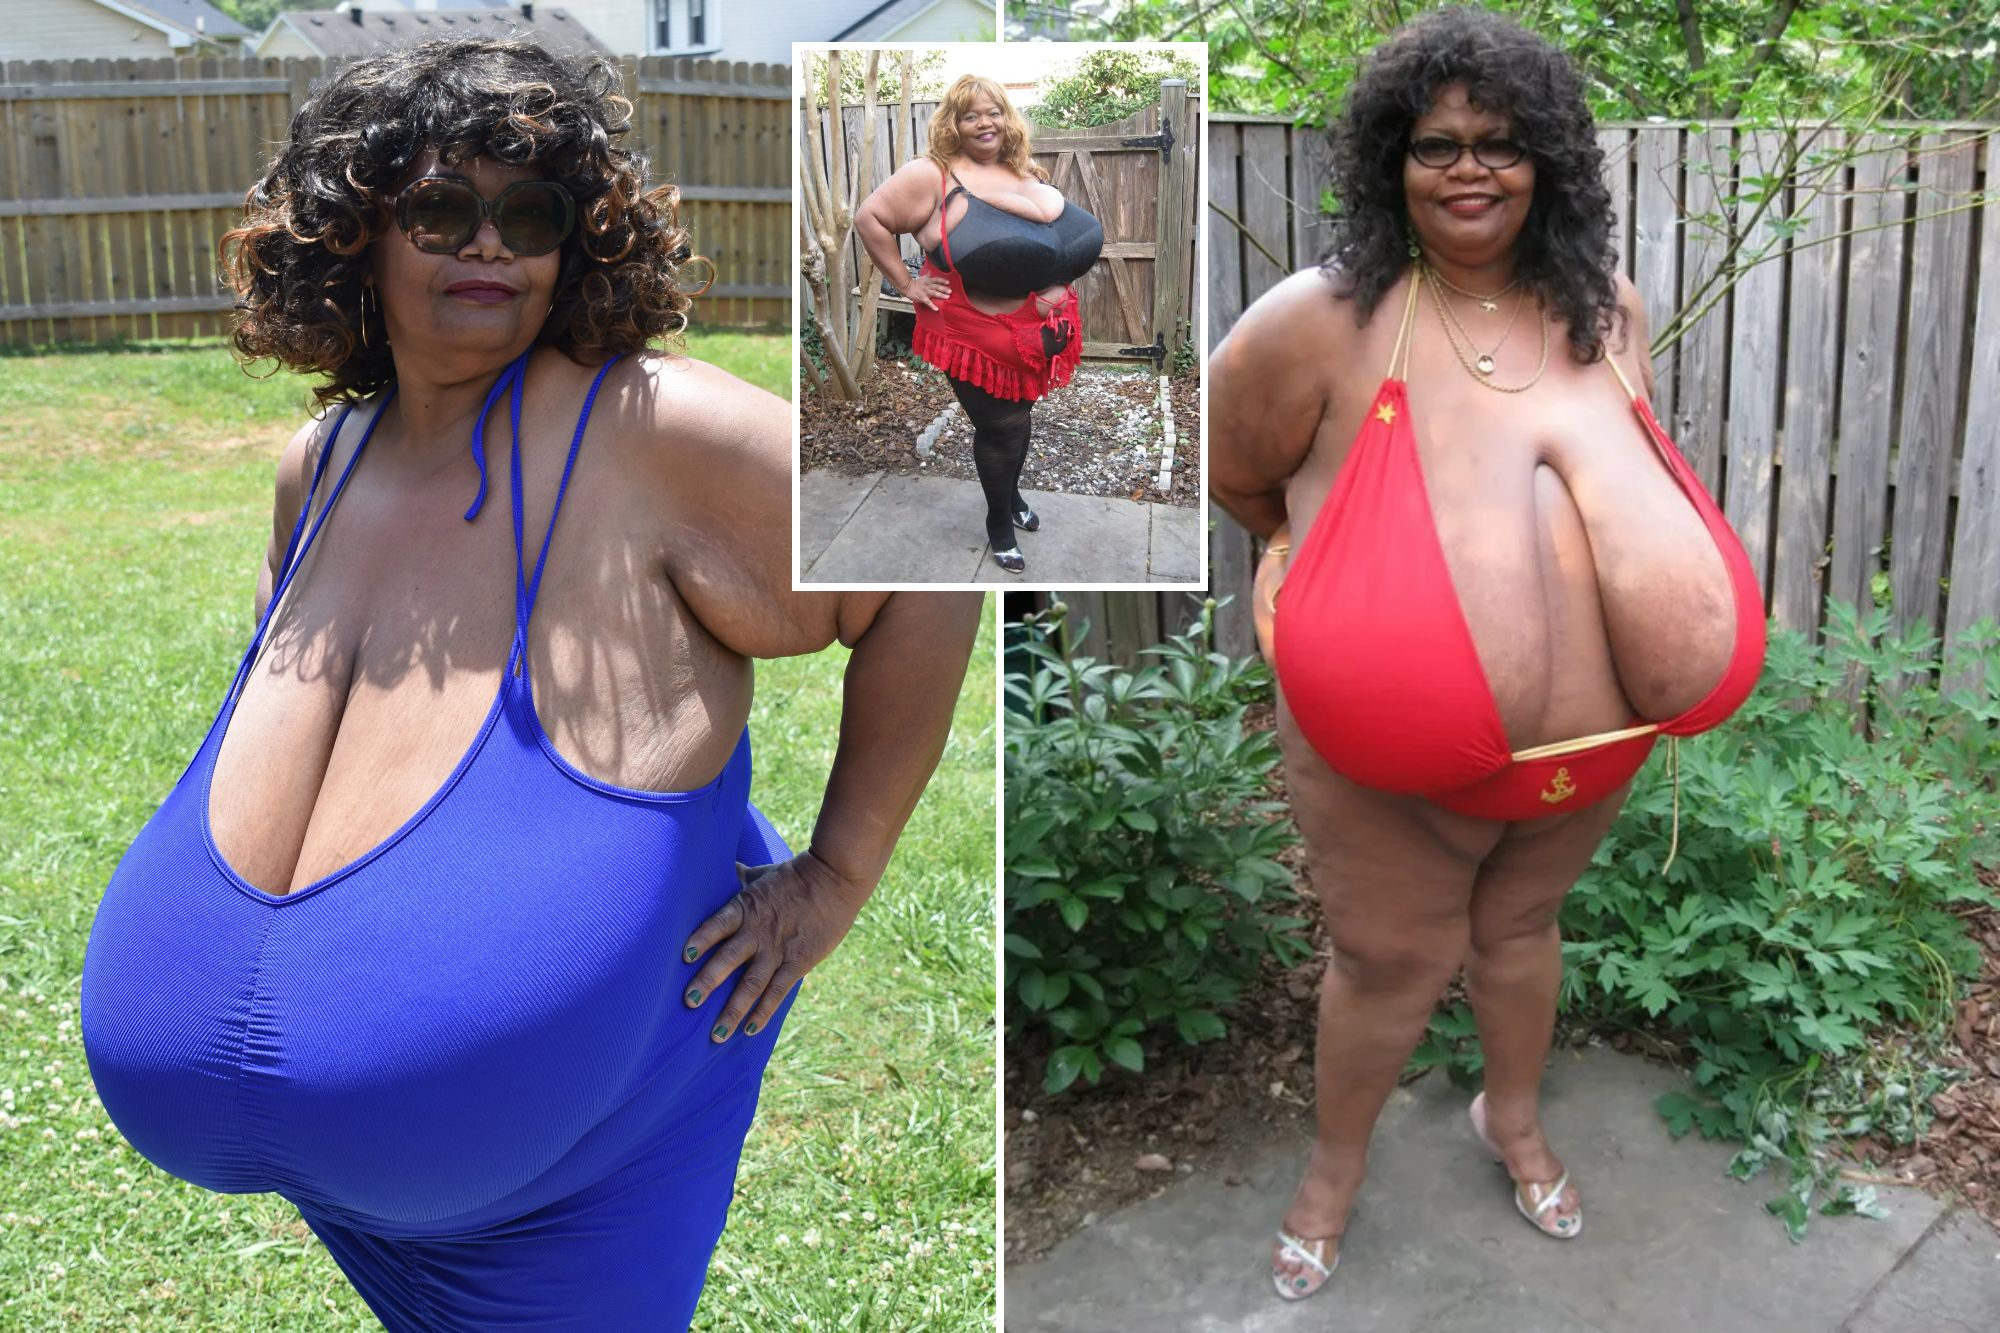 carole lariviere add photo pictures of the worlds biggest boobs